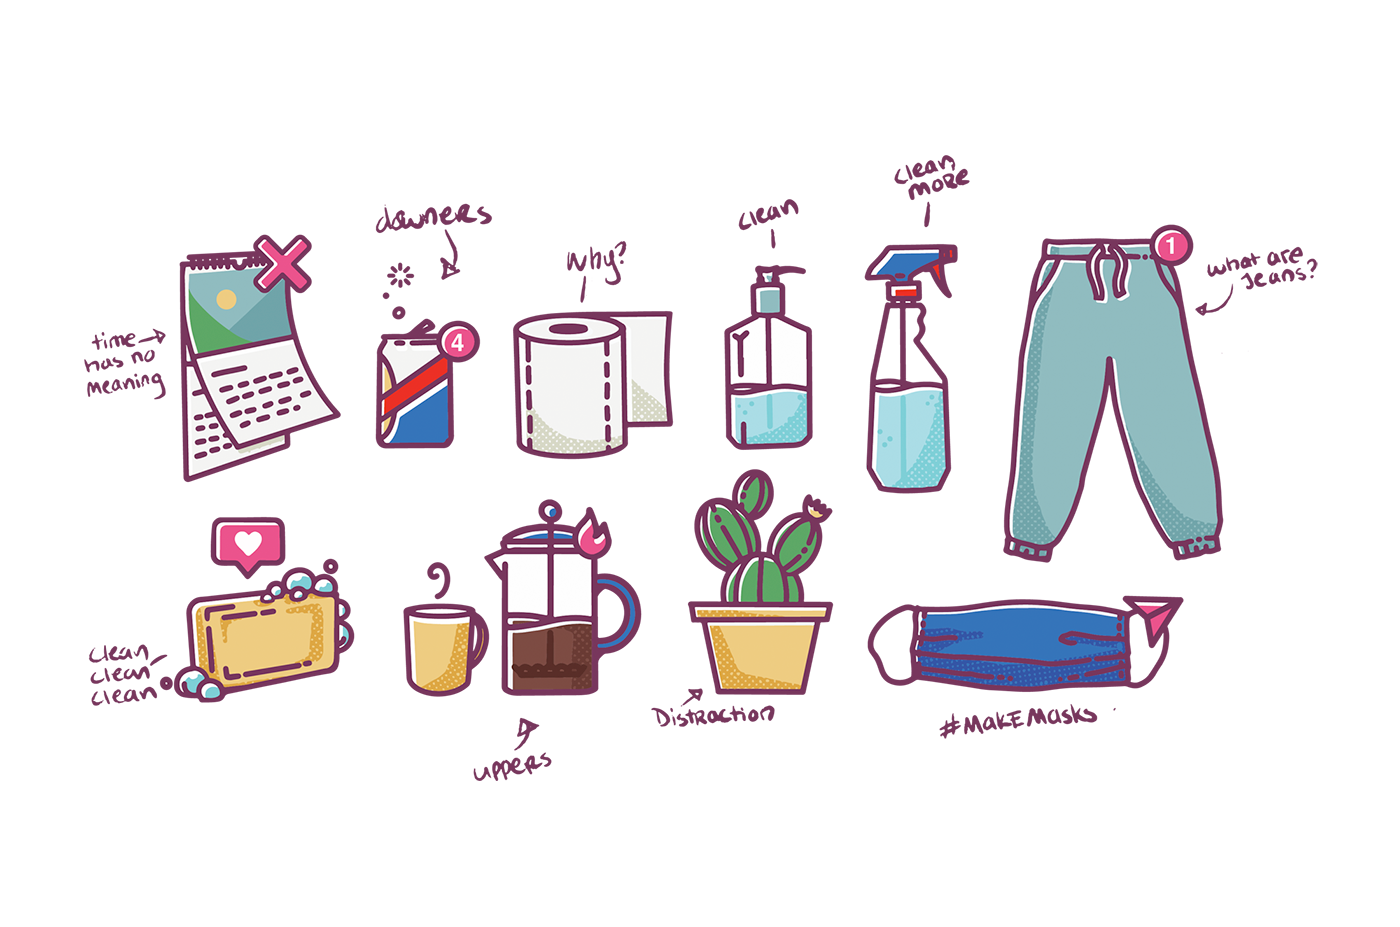 Illustration icons by Brittany Norris about working from home during COVID-19 or coronavirus